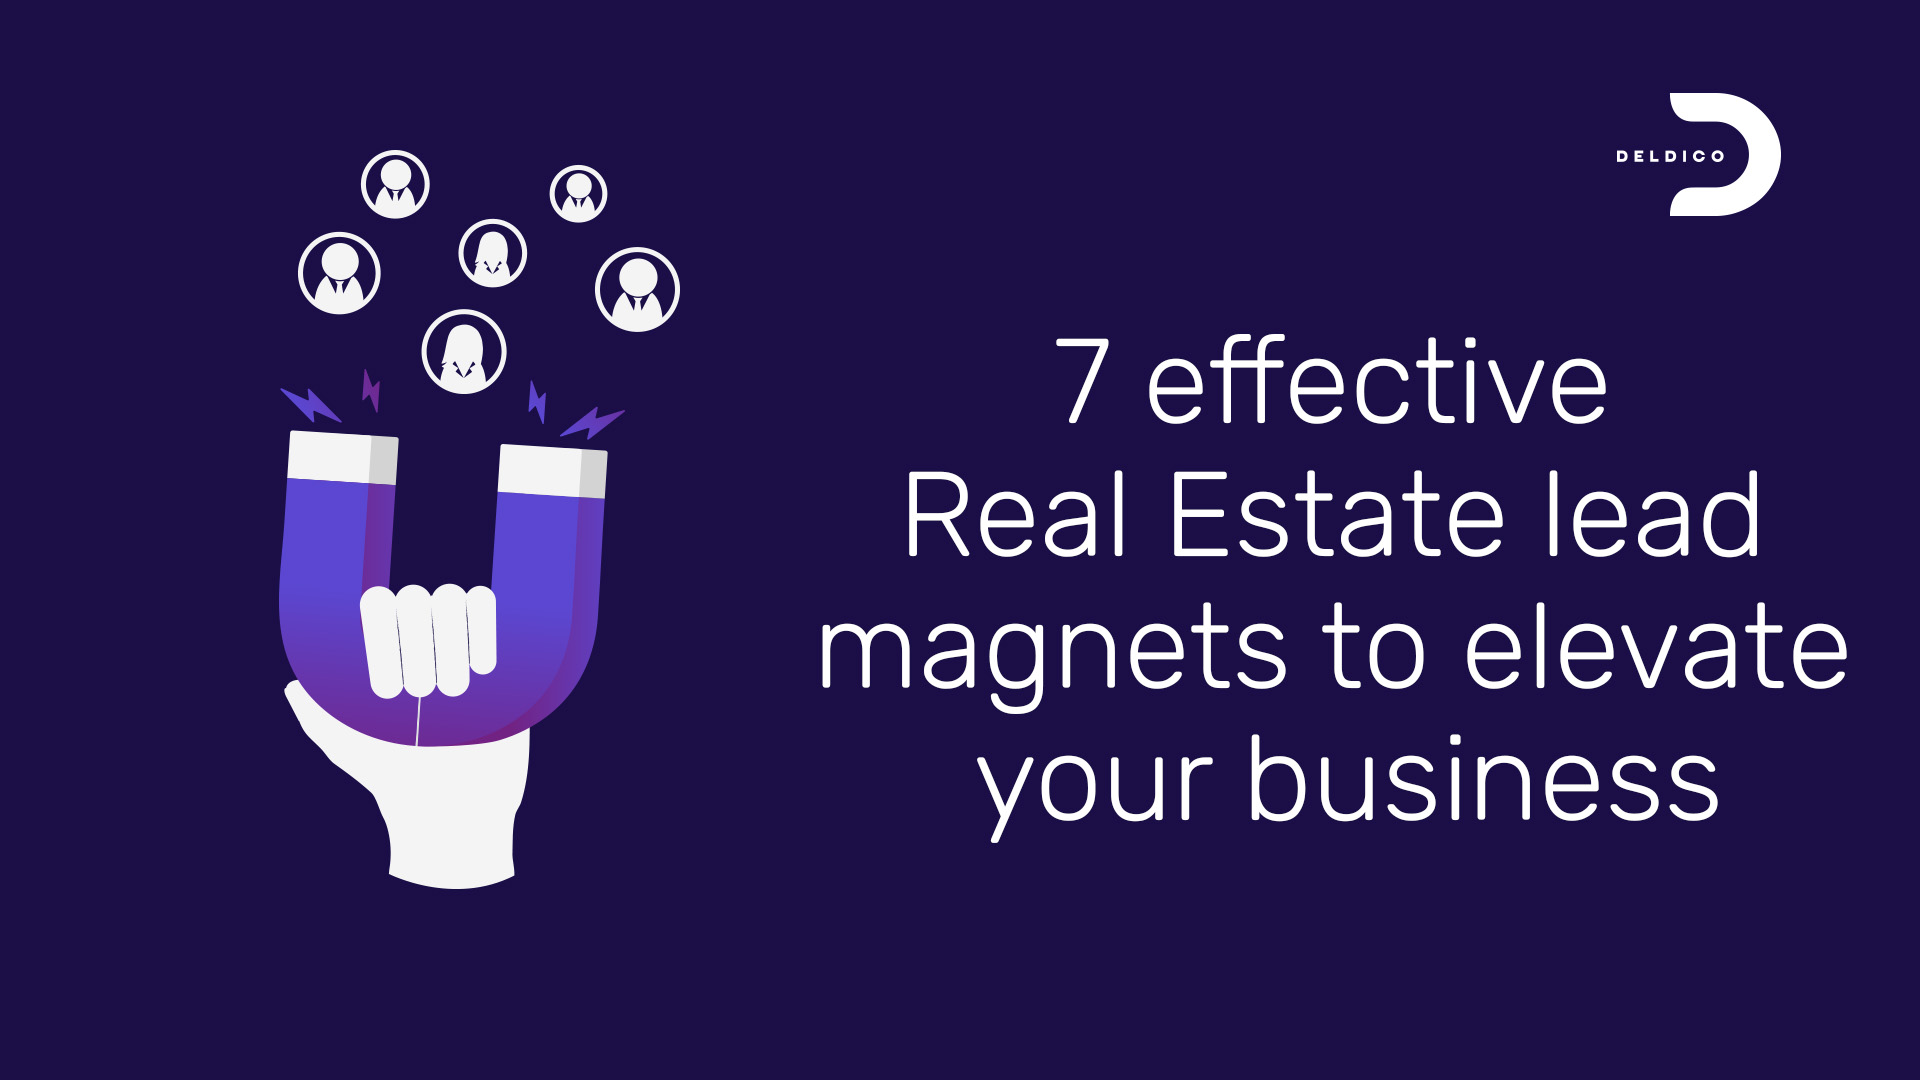 7 Effective real estate lead magnets to elevate your business